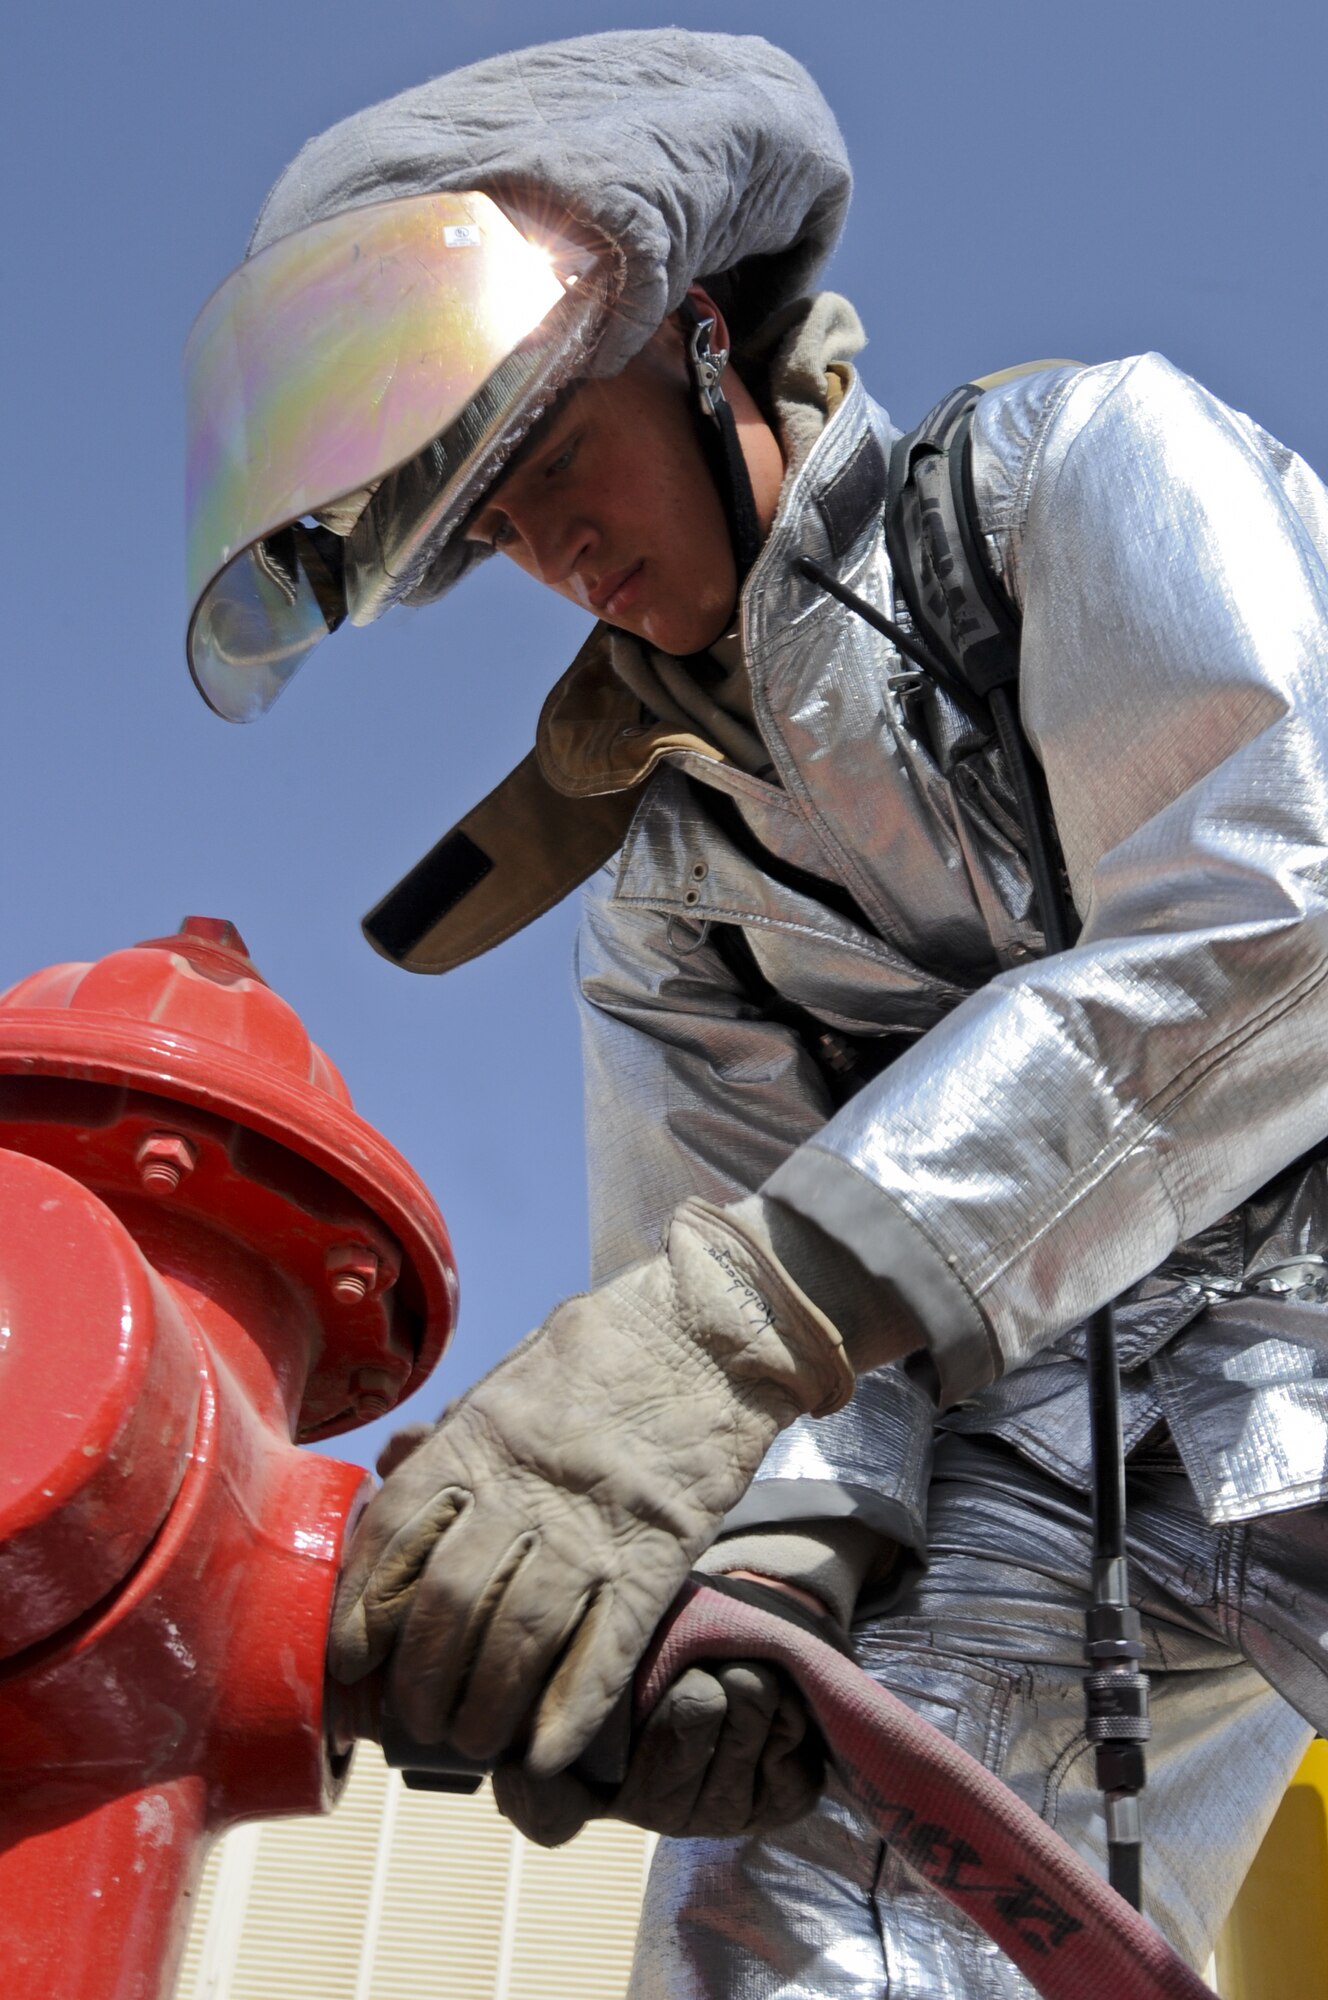 U.S. Air Force Airman 1st Class Alex Kolnberger, 380th Civil Engineer Squadron Fire Department handlineman, connects a hose to a fire hydrant at an undisclosed location in Southwest Asia Aug. 1, 2013. During an exercise, Kolnberger’s team was required to show the capability to swiftly deploy handline hoses. Kolnberger calls South St. Paul, Minn., home and is deployed from Eielson Air Force Base, Alaska. (U.S. Air Force photo by Staff Sgt. Jacob Morgan)